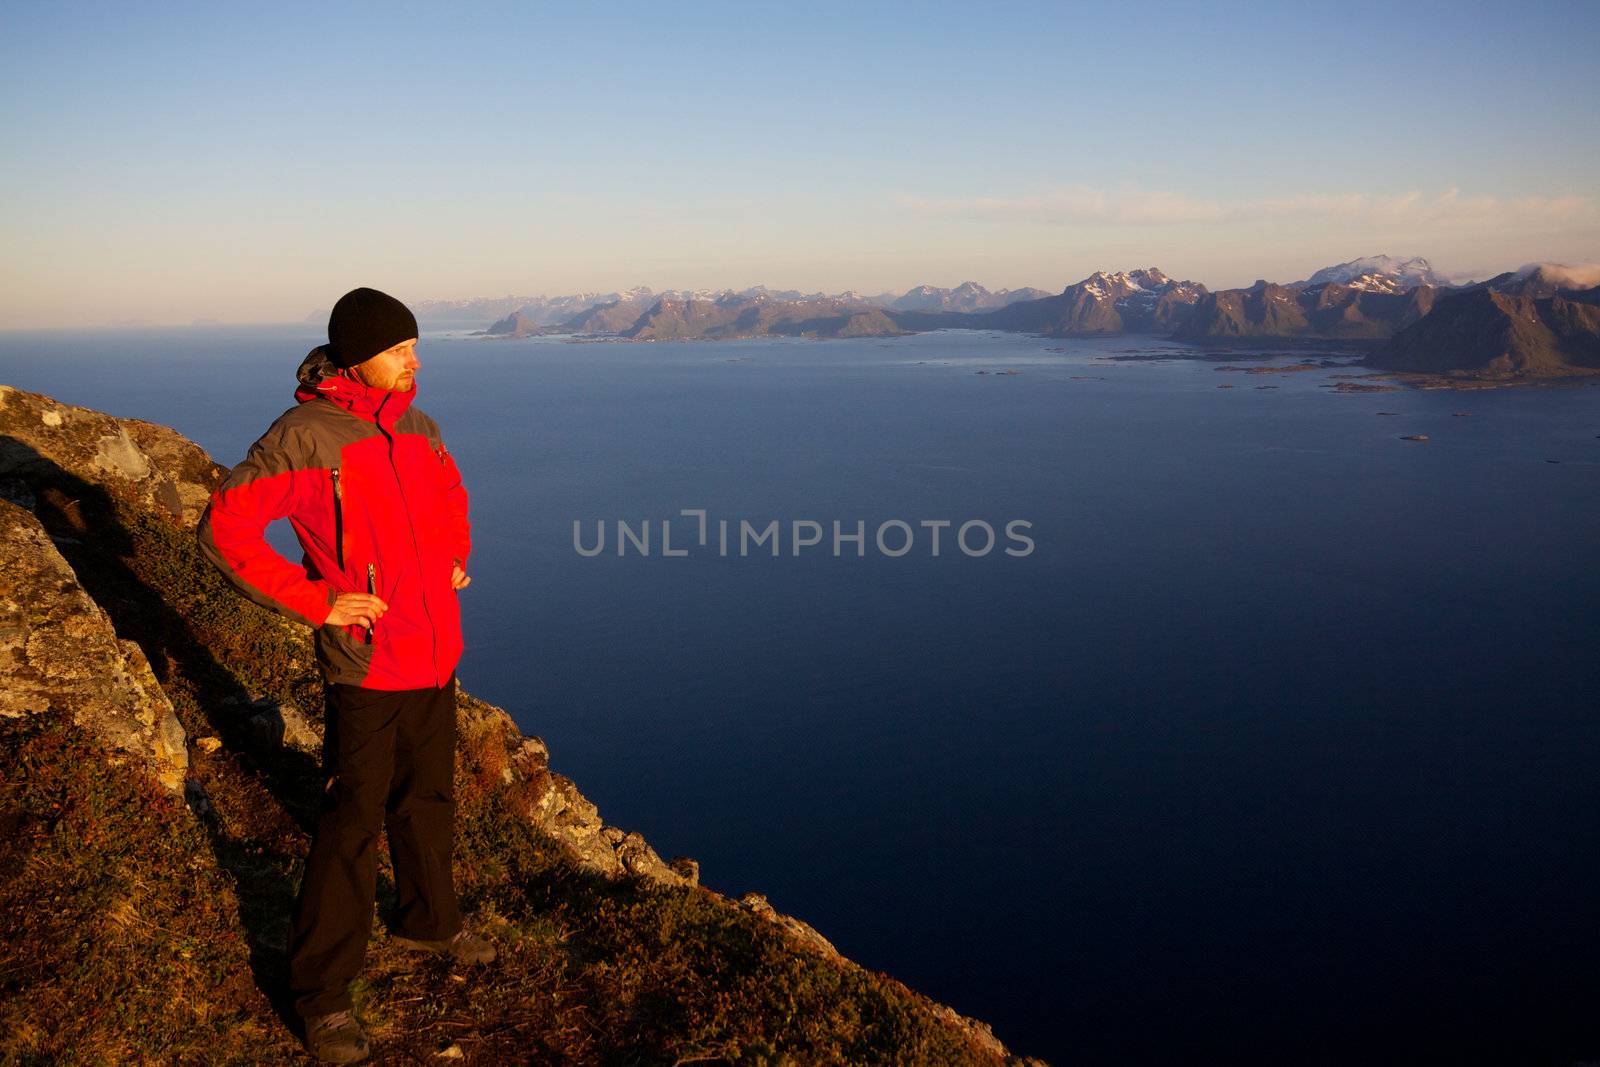 Young man standing on the top of mountain Festvagtinden with picturesque scenery of Lofoten islands, Norway